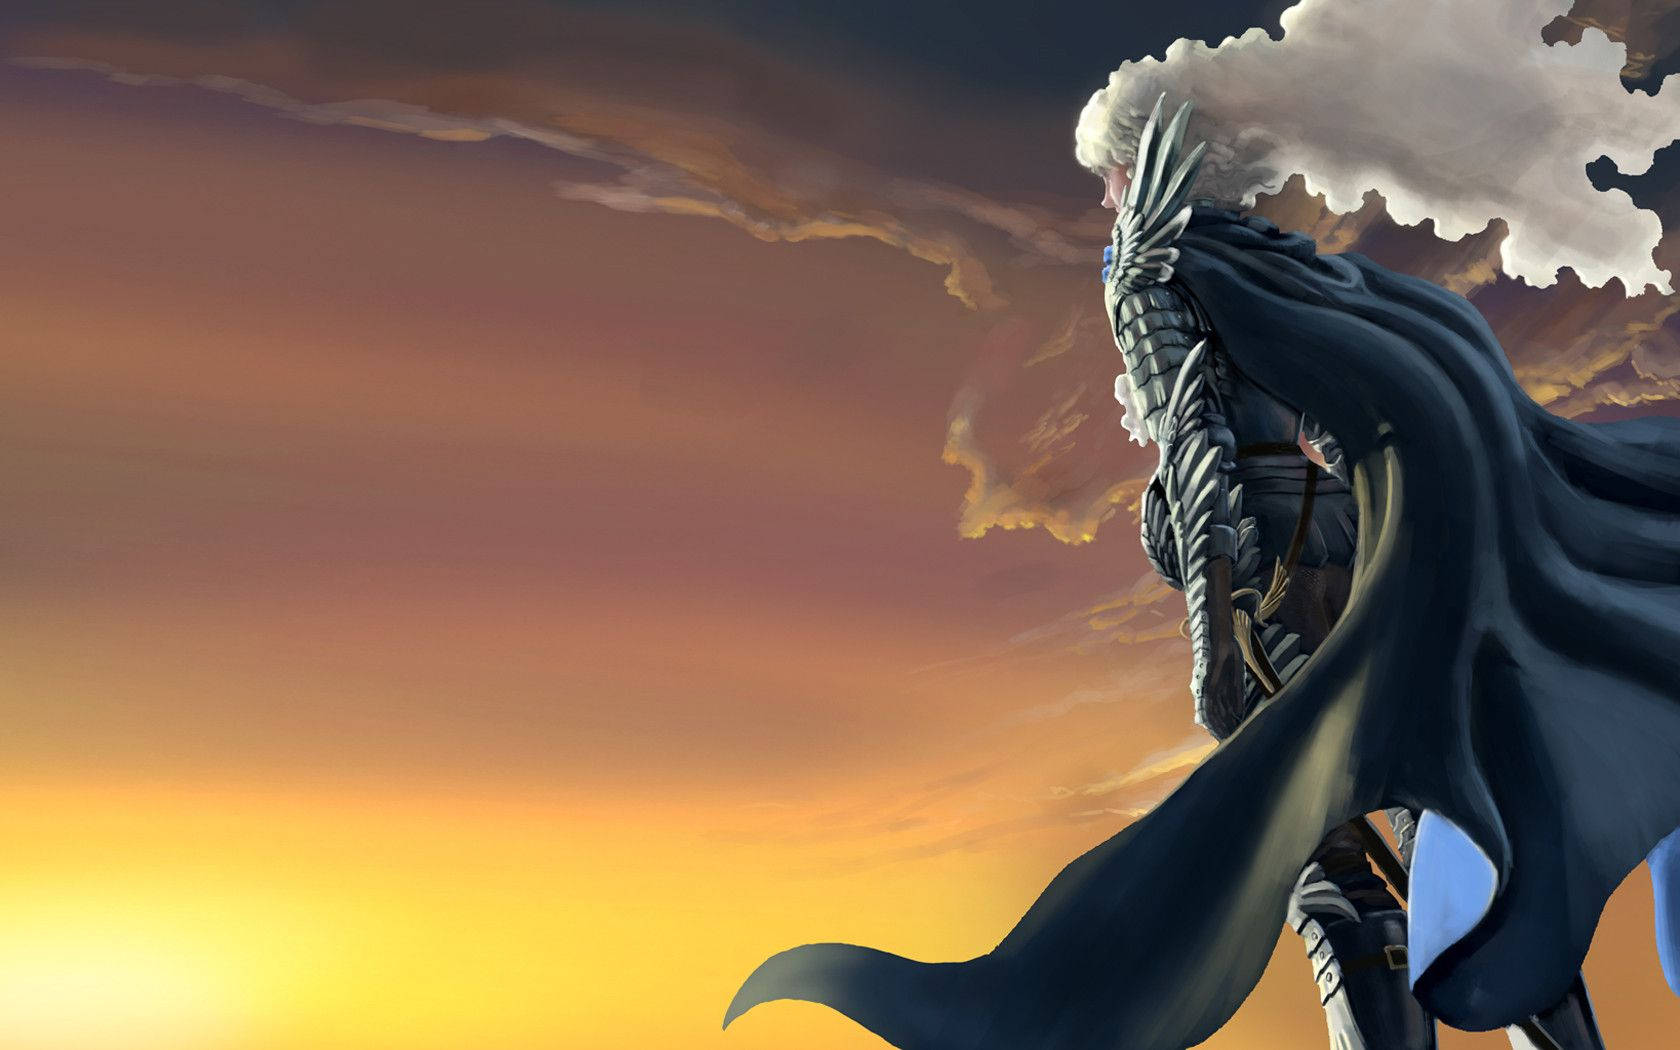 "The Falcon of Light, Griffith, from Berserk" Wallpaper